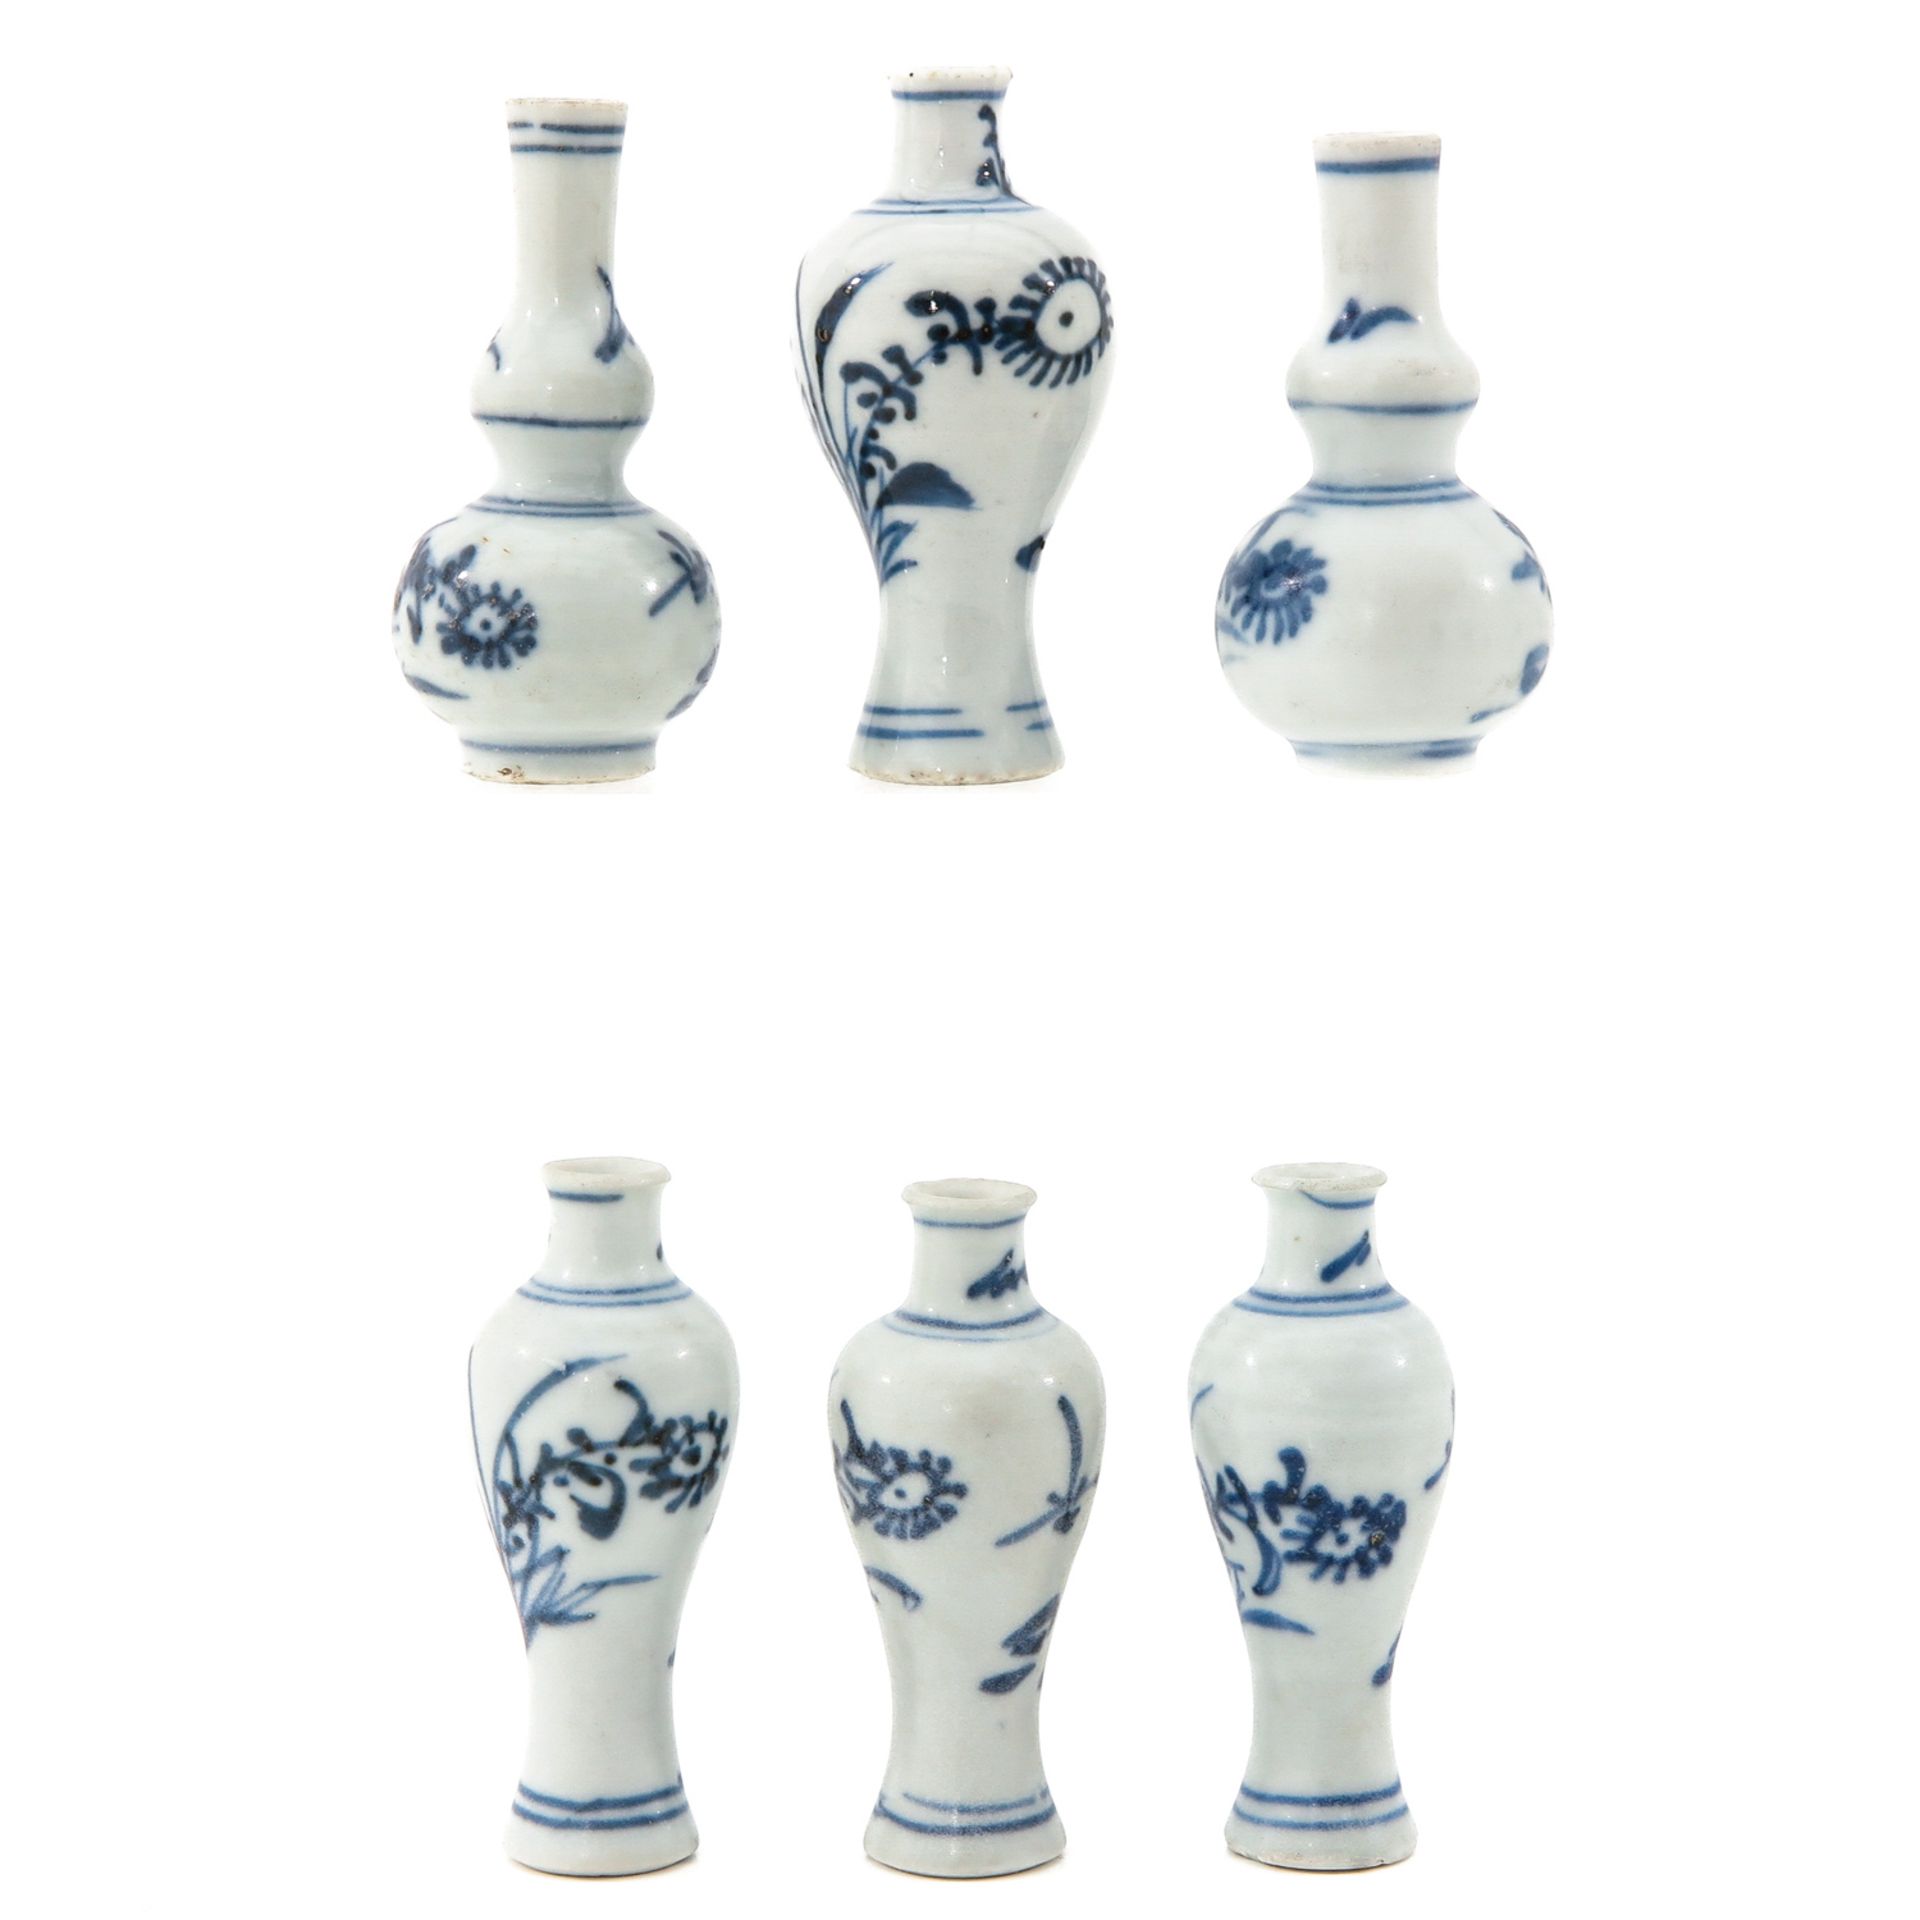 A Collection of 6 Miniature Vases - Image 2 of 10